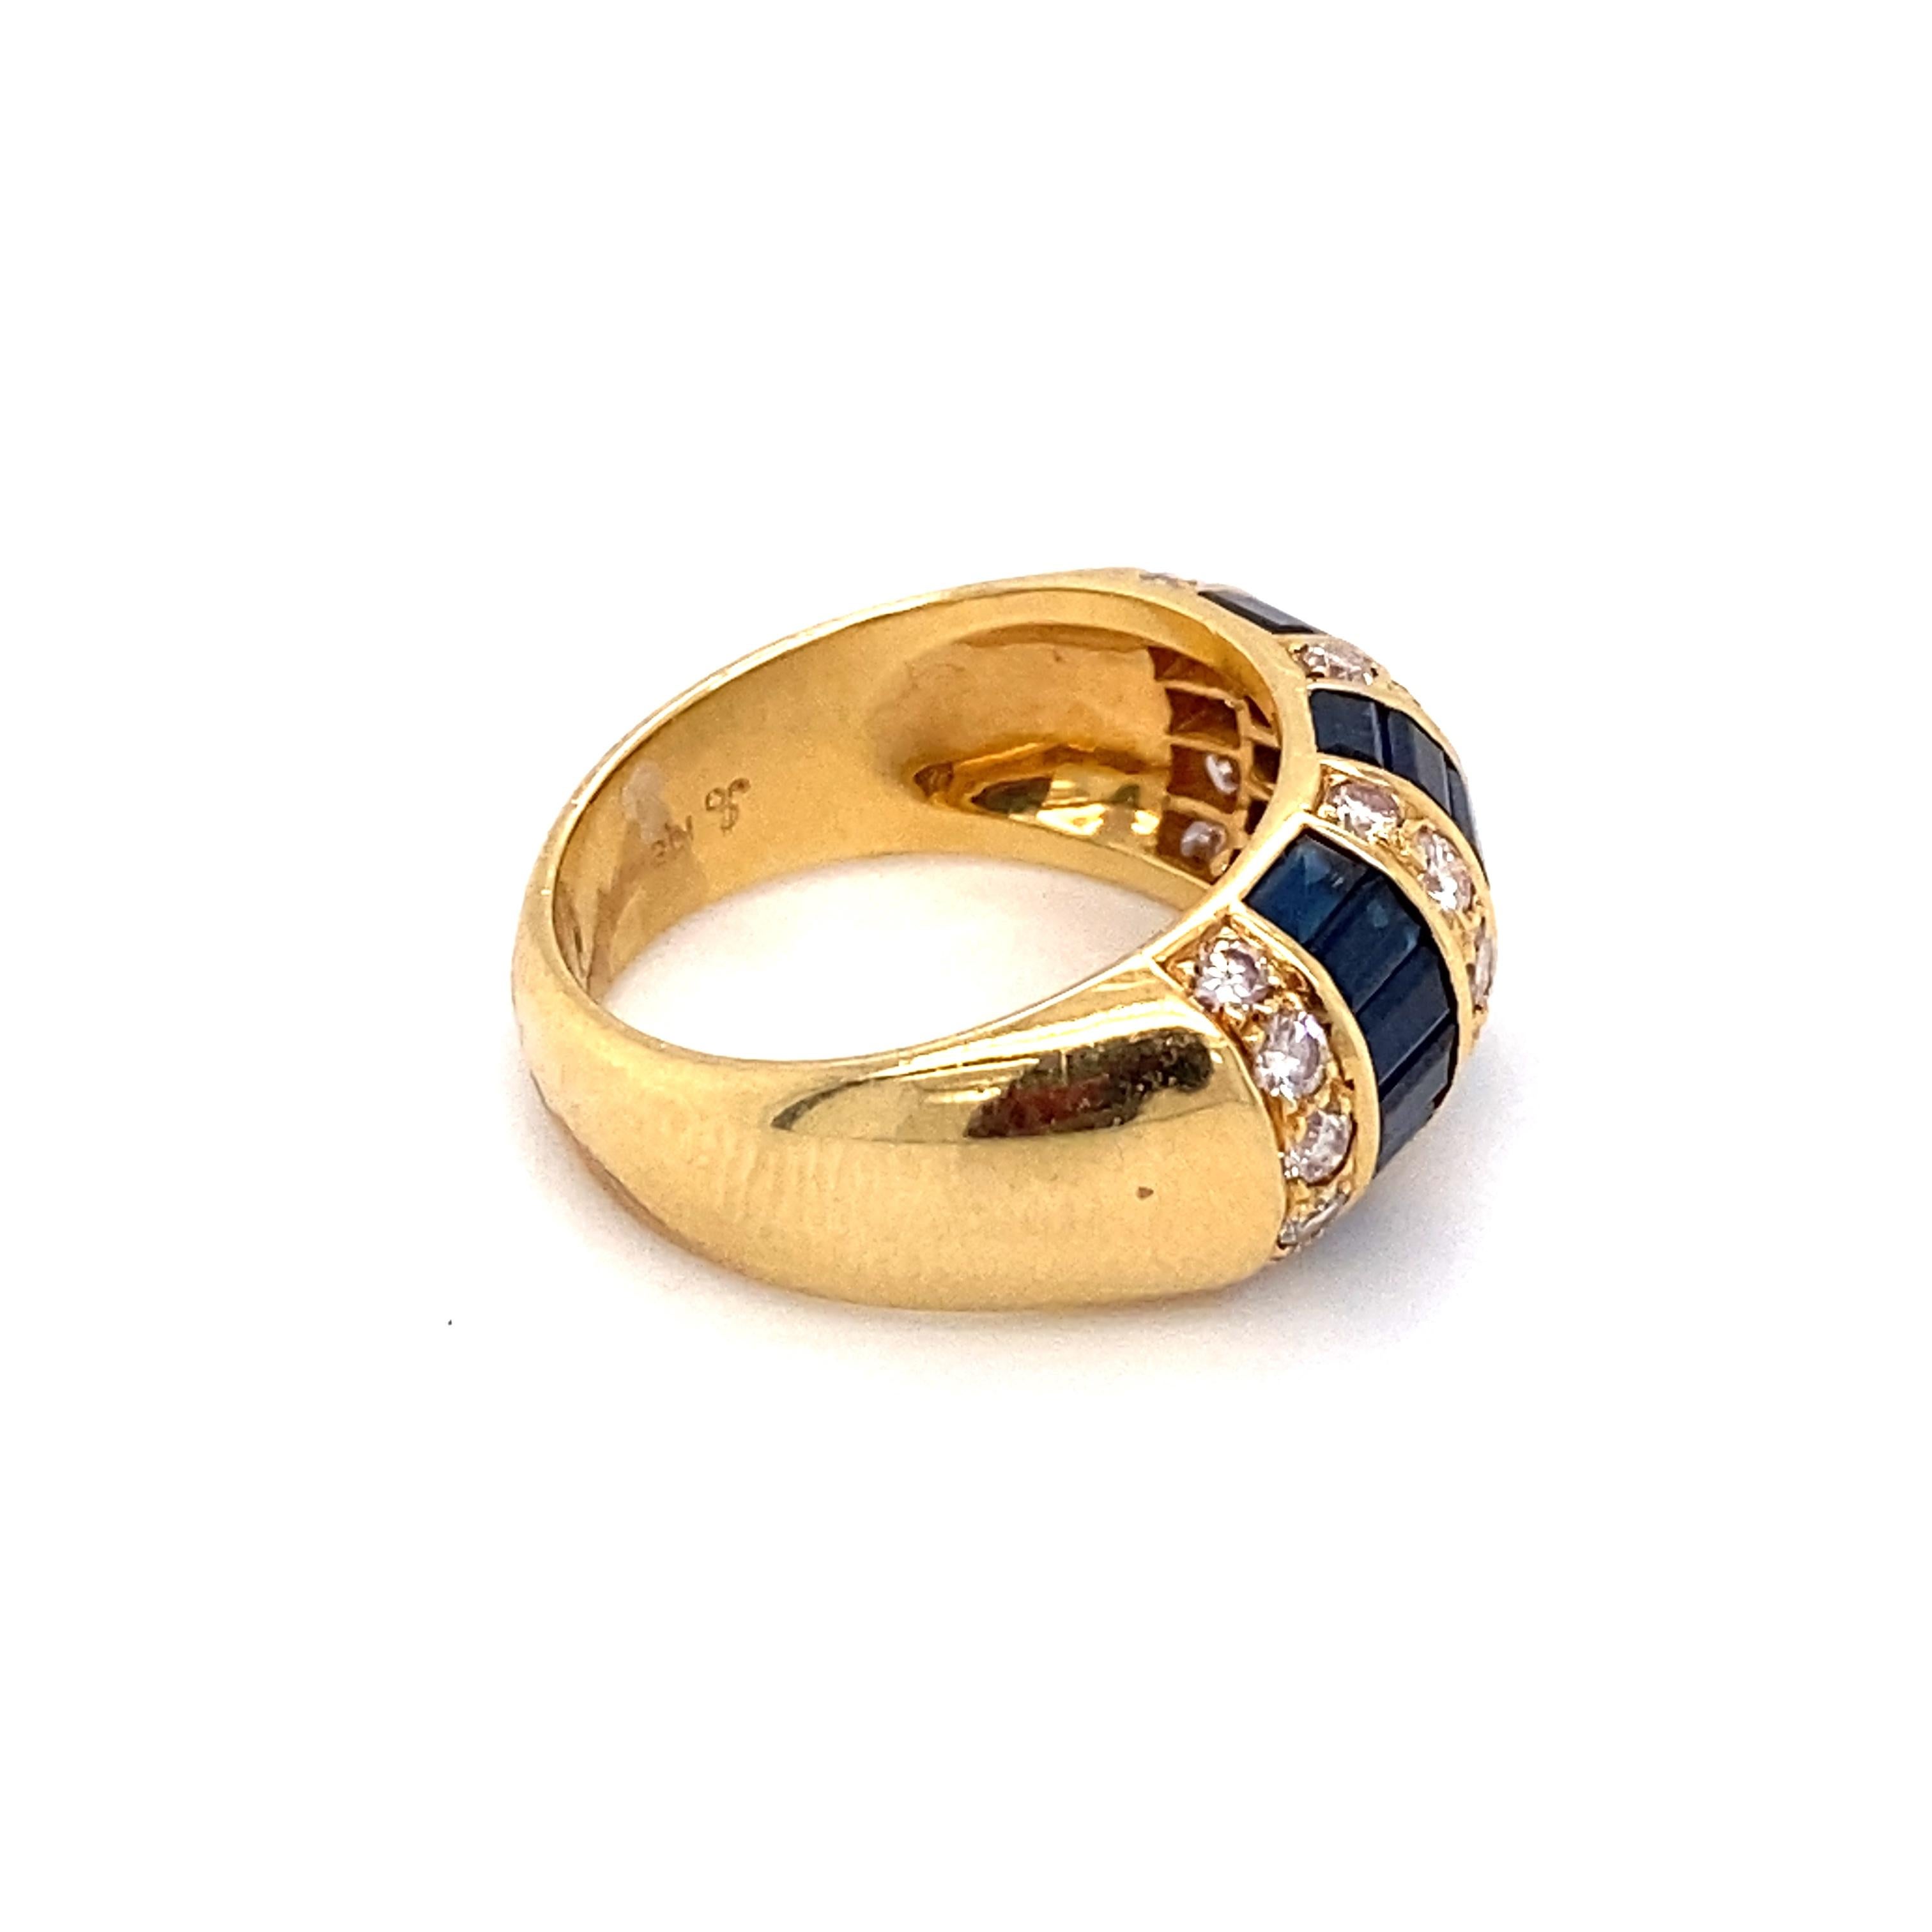 Circa: 1980s
Metal Type: 18 Karat Yellow Gold
Weight: 8.2 grams
Size: US 6, resizable

Diamond Details:
Carat: 0.90 carat total weight
Cut: Round
Color: G
Clarity: VS

Sapphire Details: 
Carat: 1.10 carat total weight
Cut: Baguette
Color: Royal blue